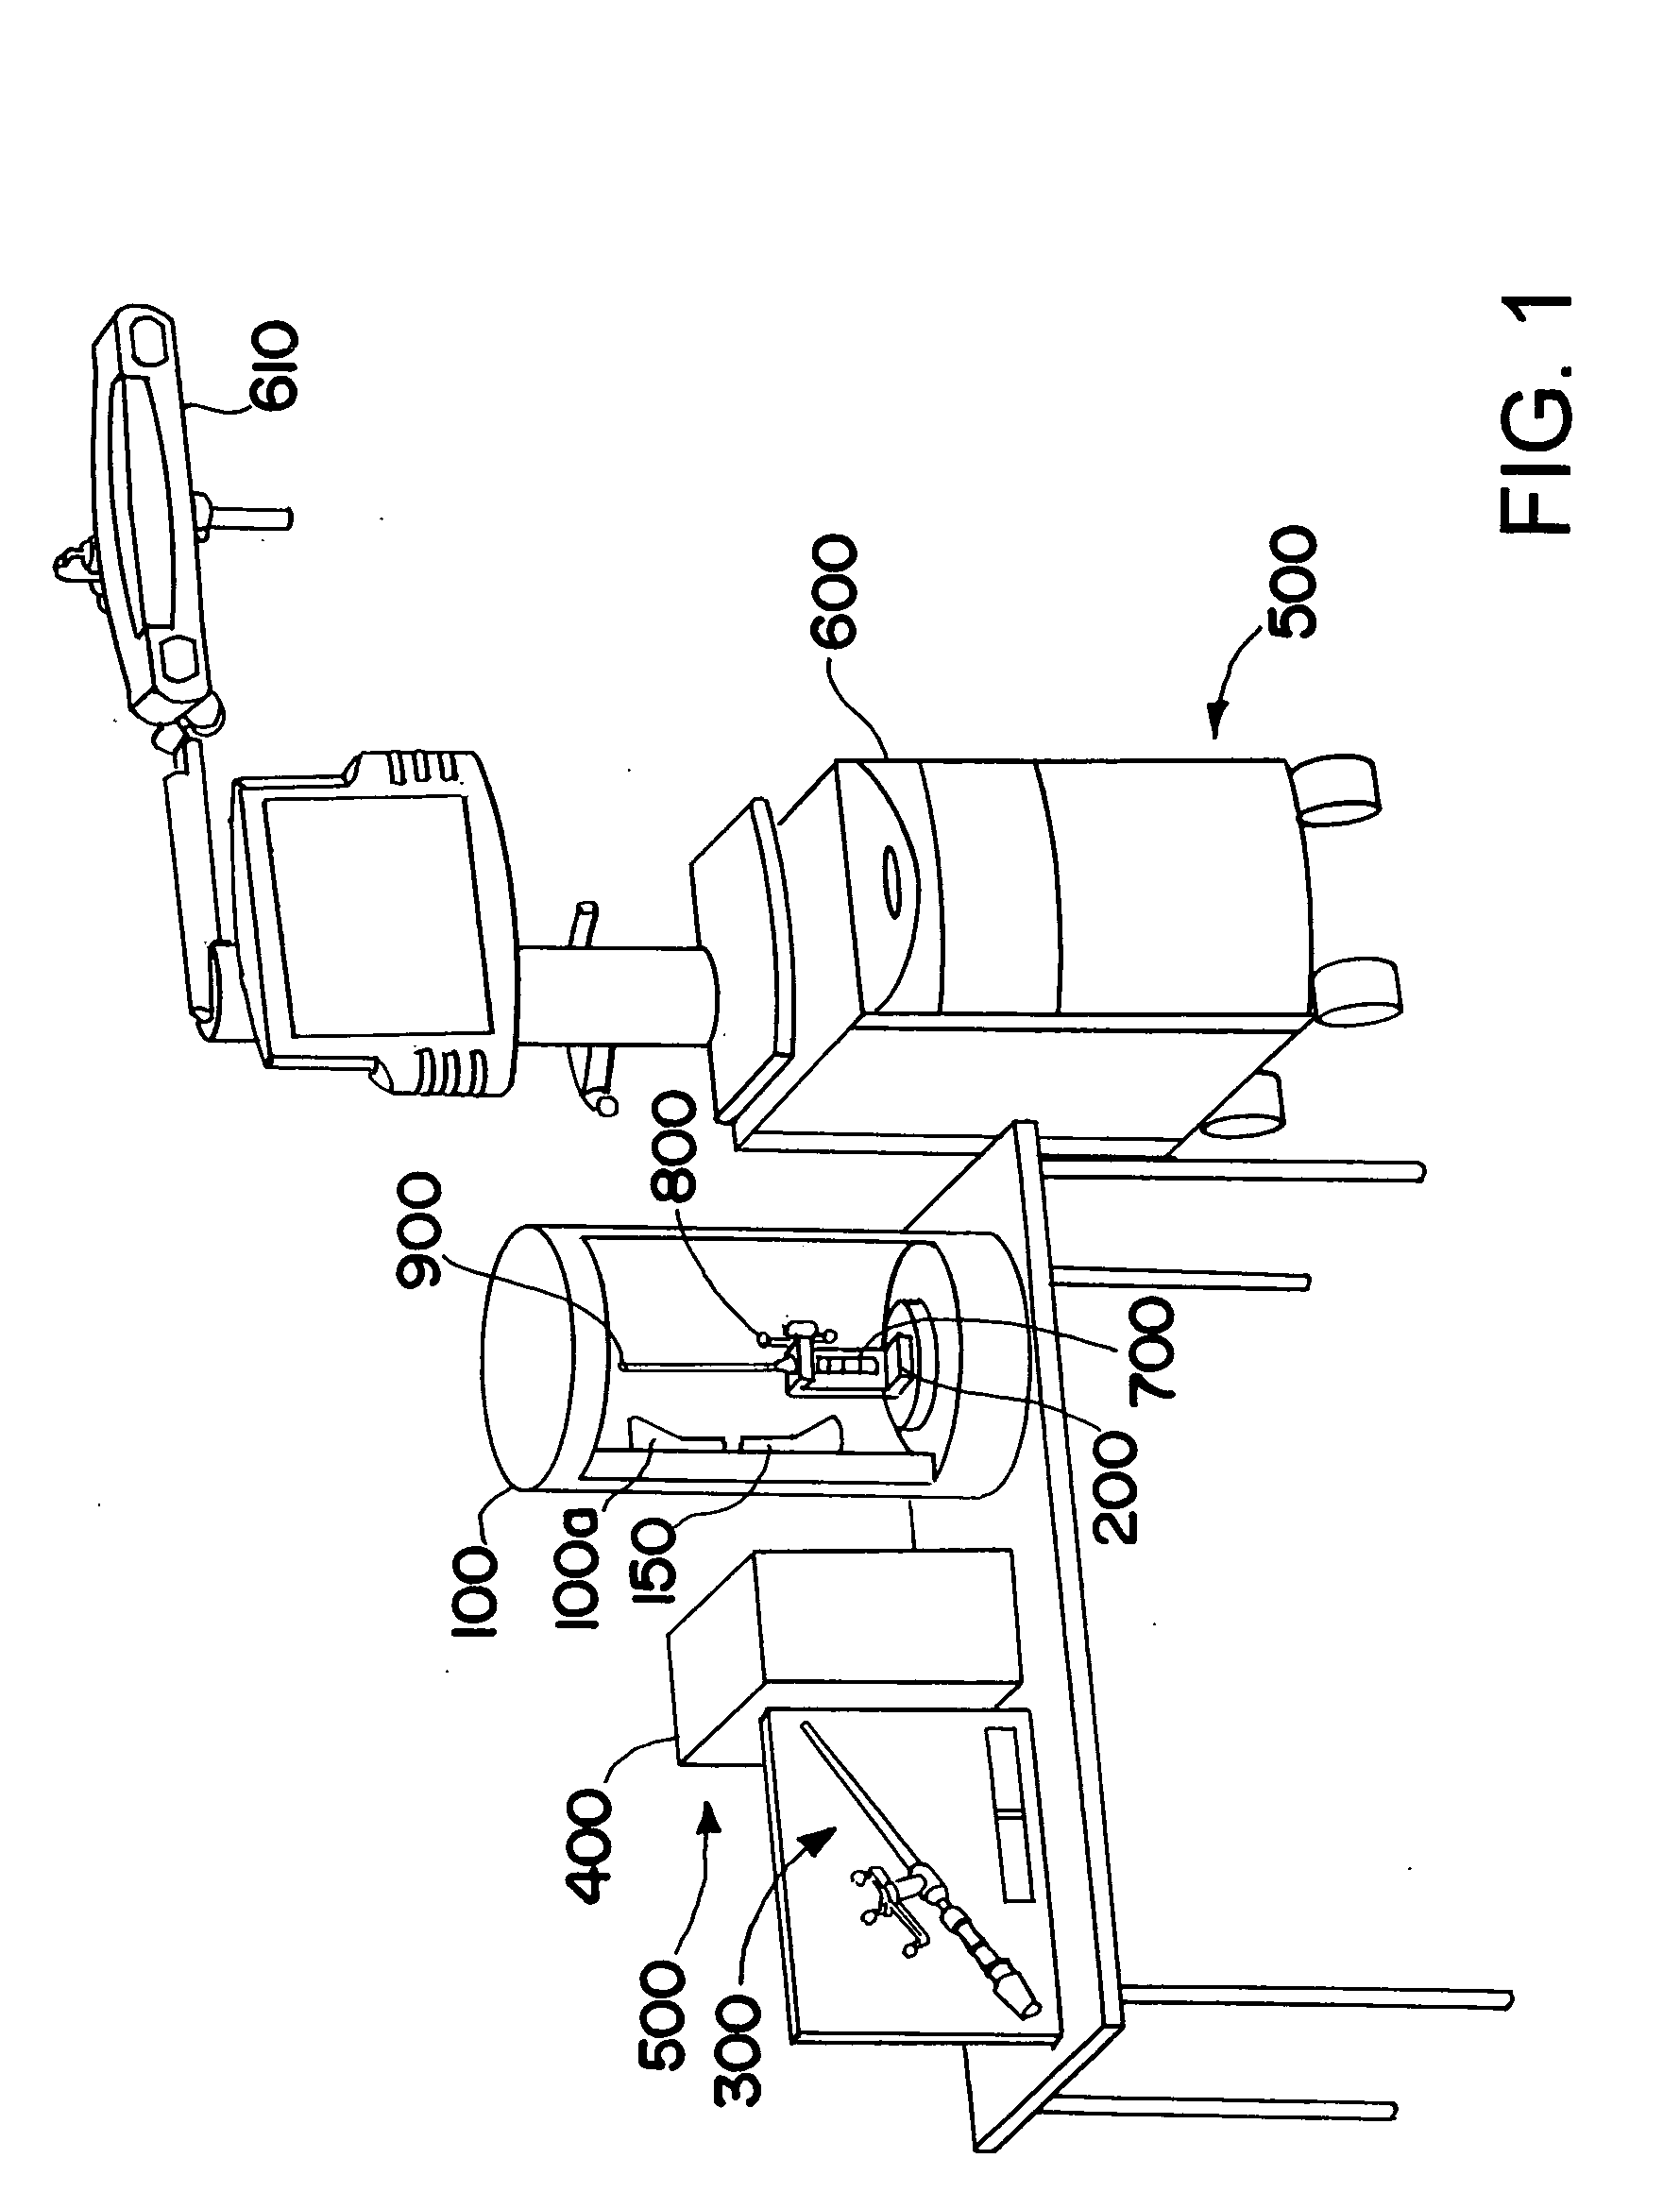 Devices and methods for automatically verifying, calibrating and surveying instruments for computer-assisted surgery